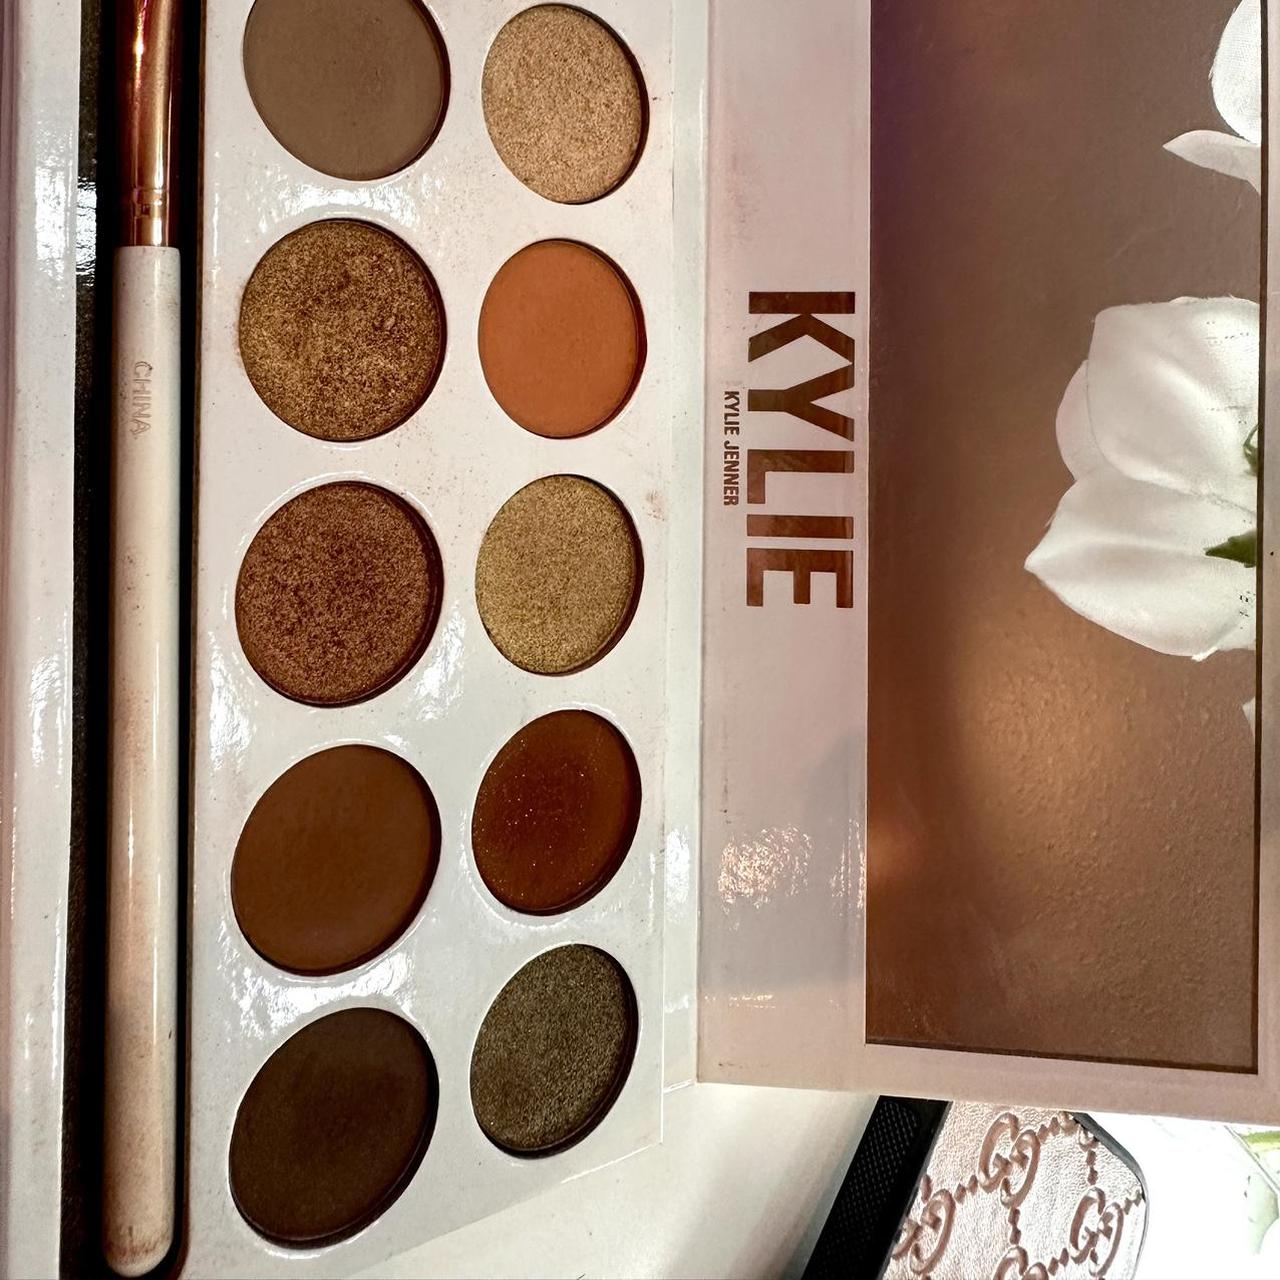 Palettes  Kylie Cosmetics by Kylie Jenner